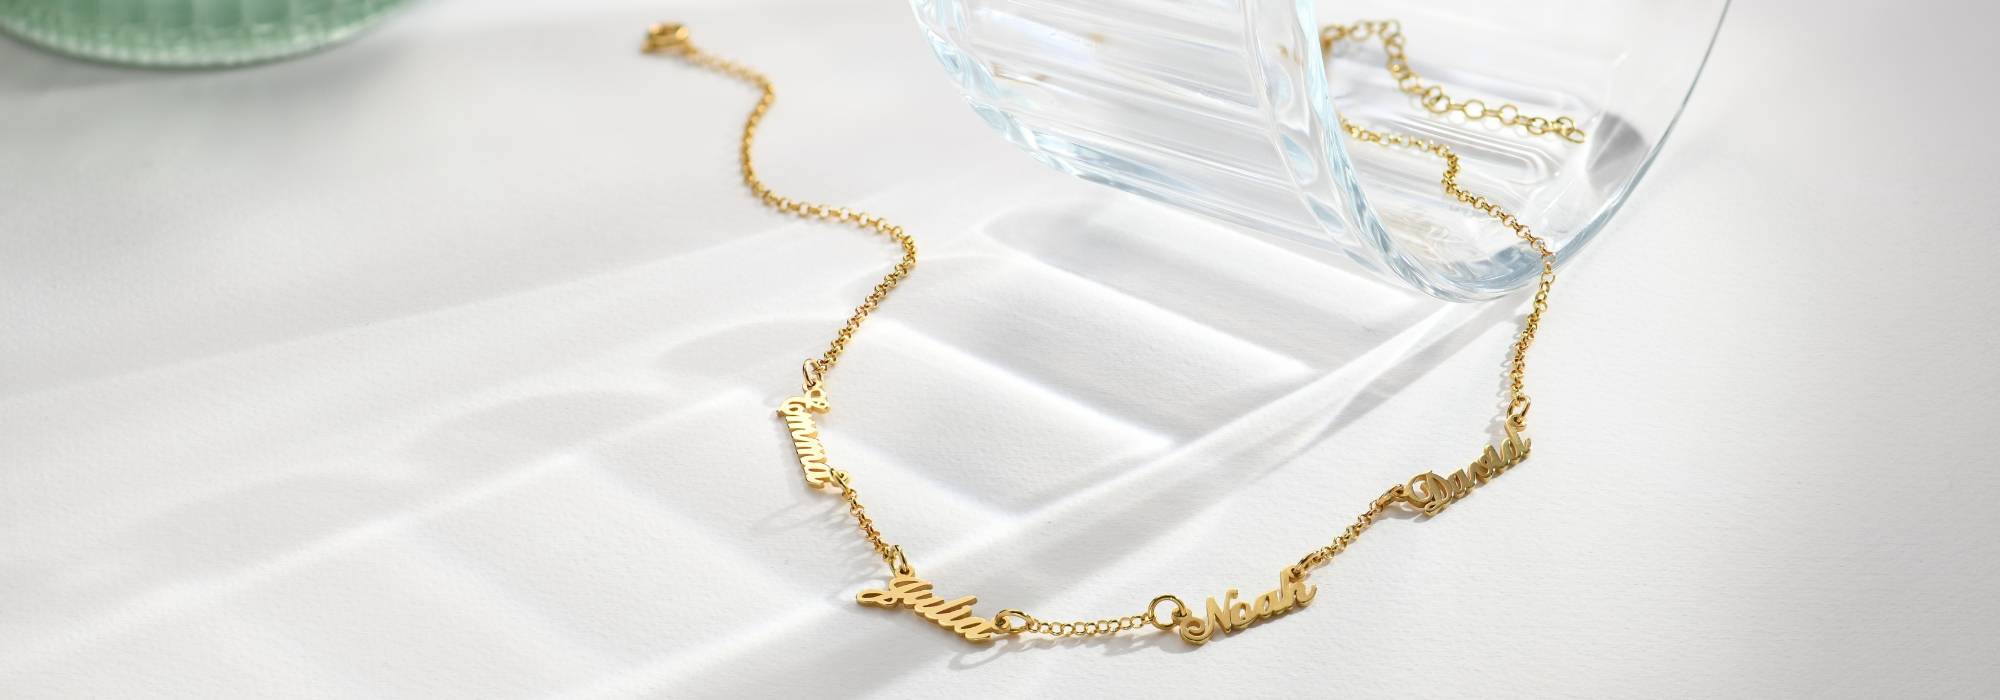 Personalized Jewelry Gifts Under $150